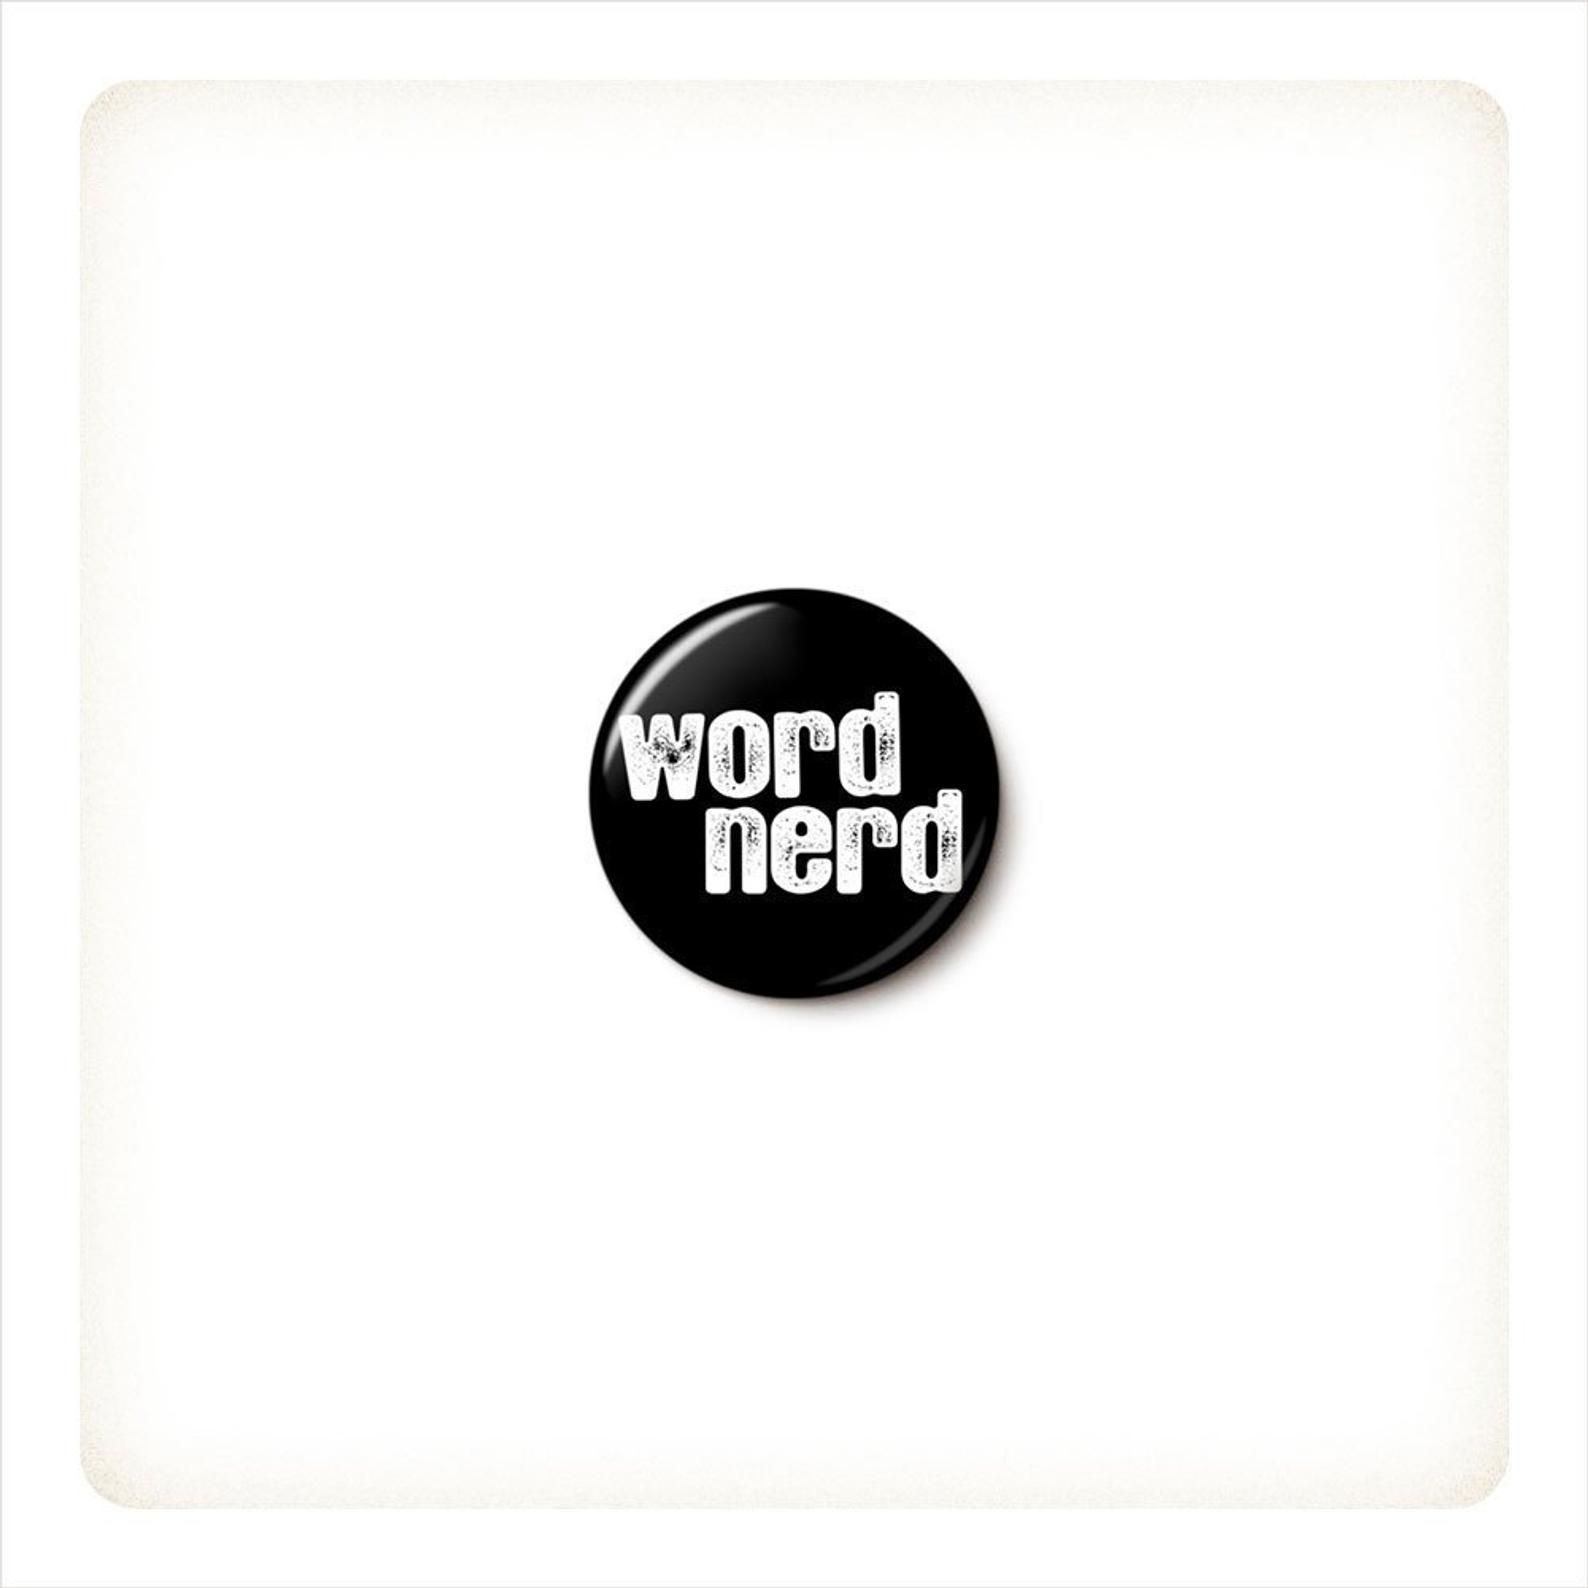 A black pin that reads "word nerd" in white lettering.